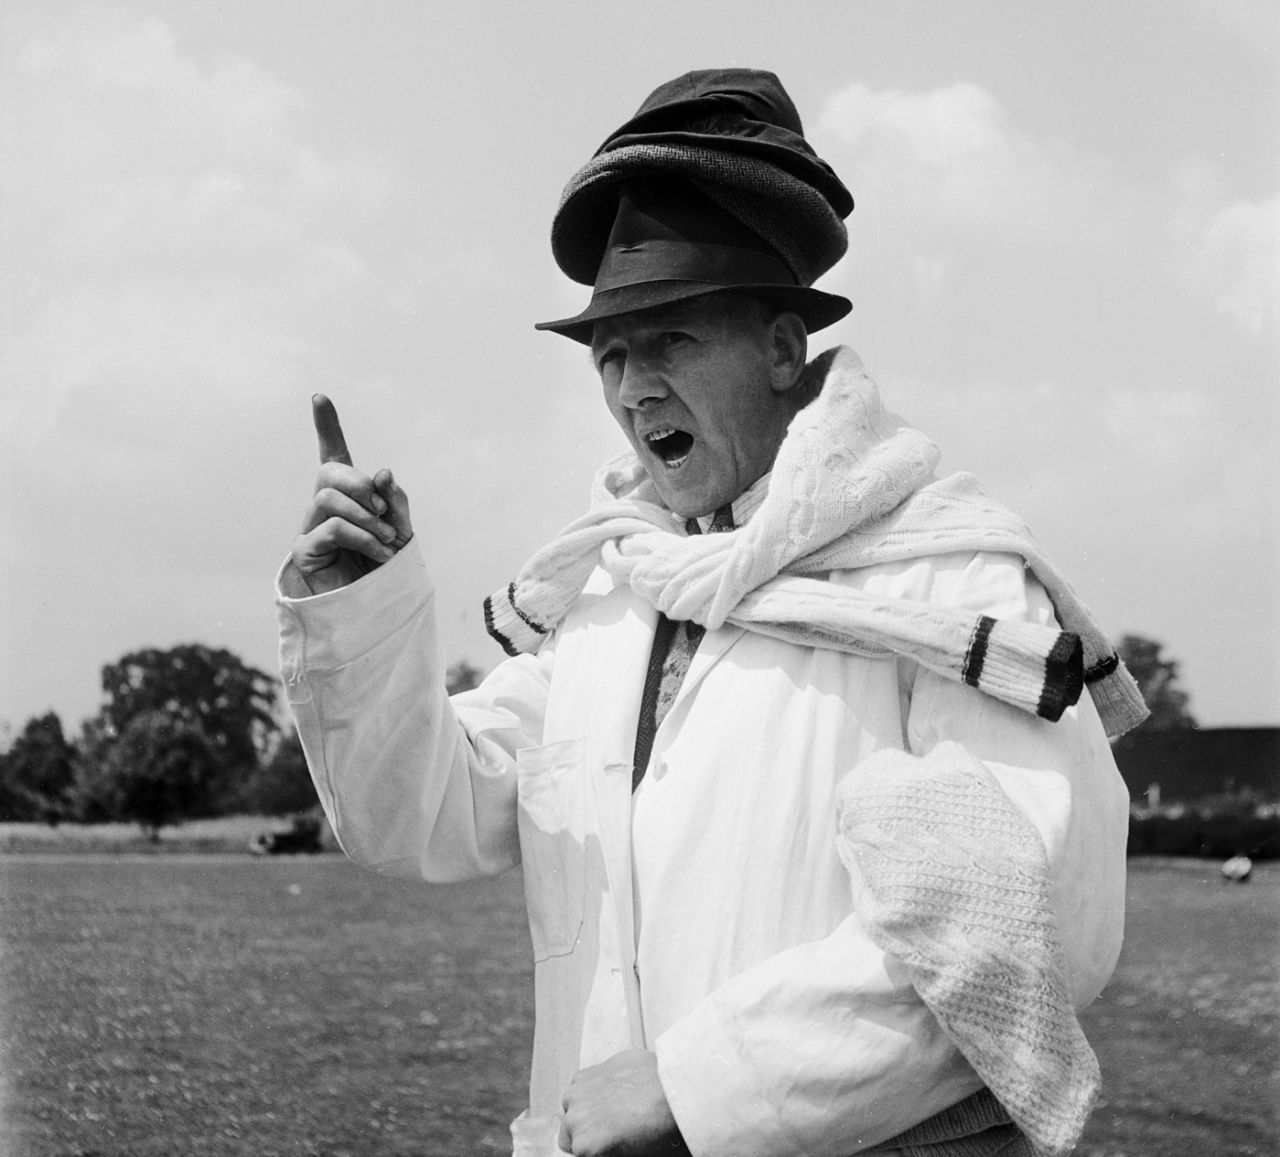 Umpire Arthur Belson wears several hats and sweaters, Amersham Hill, June 9, 1949